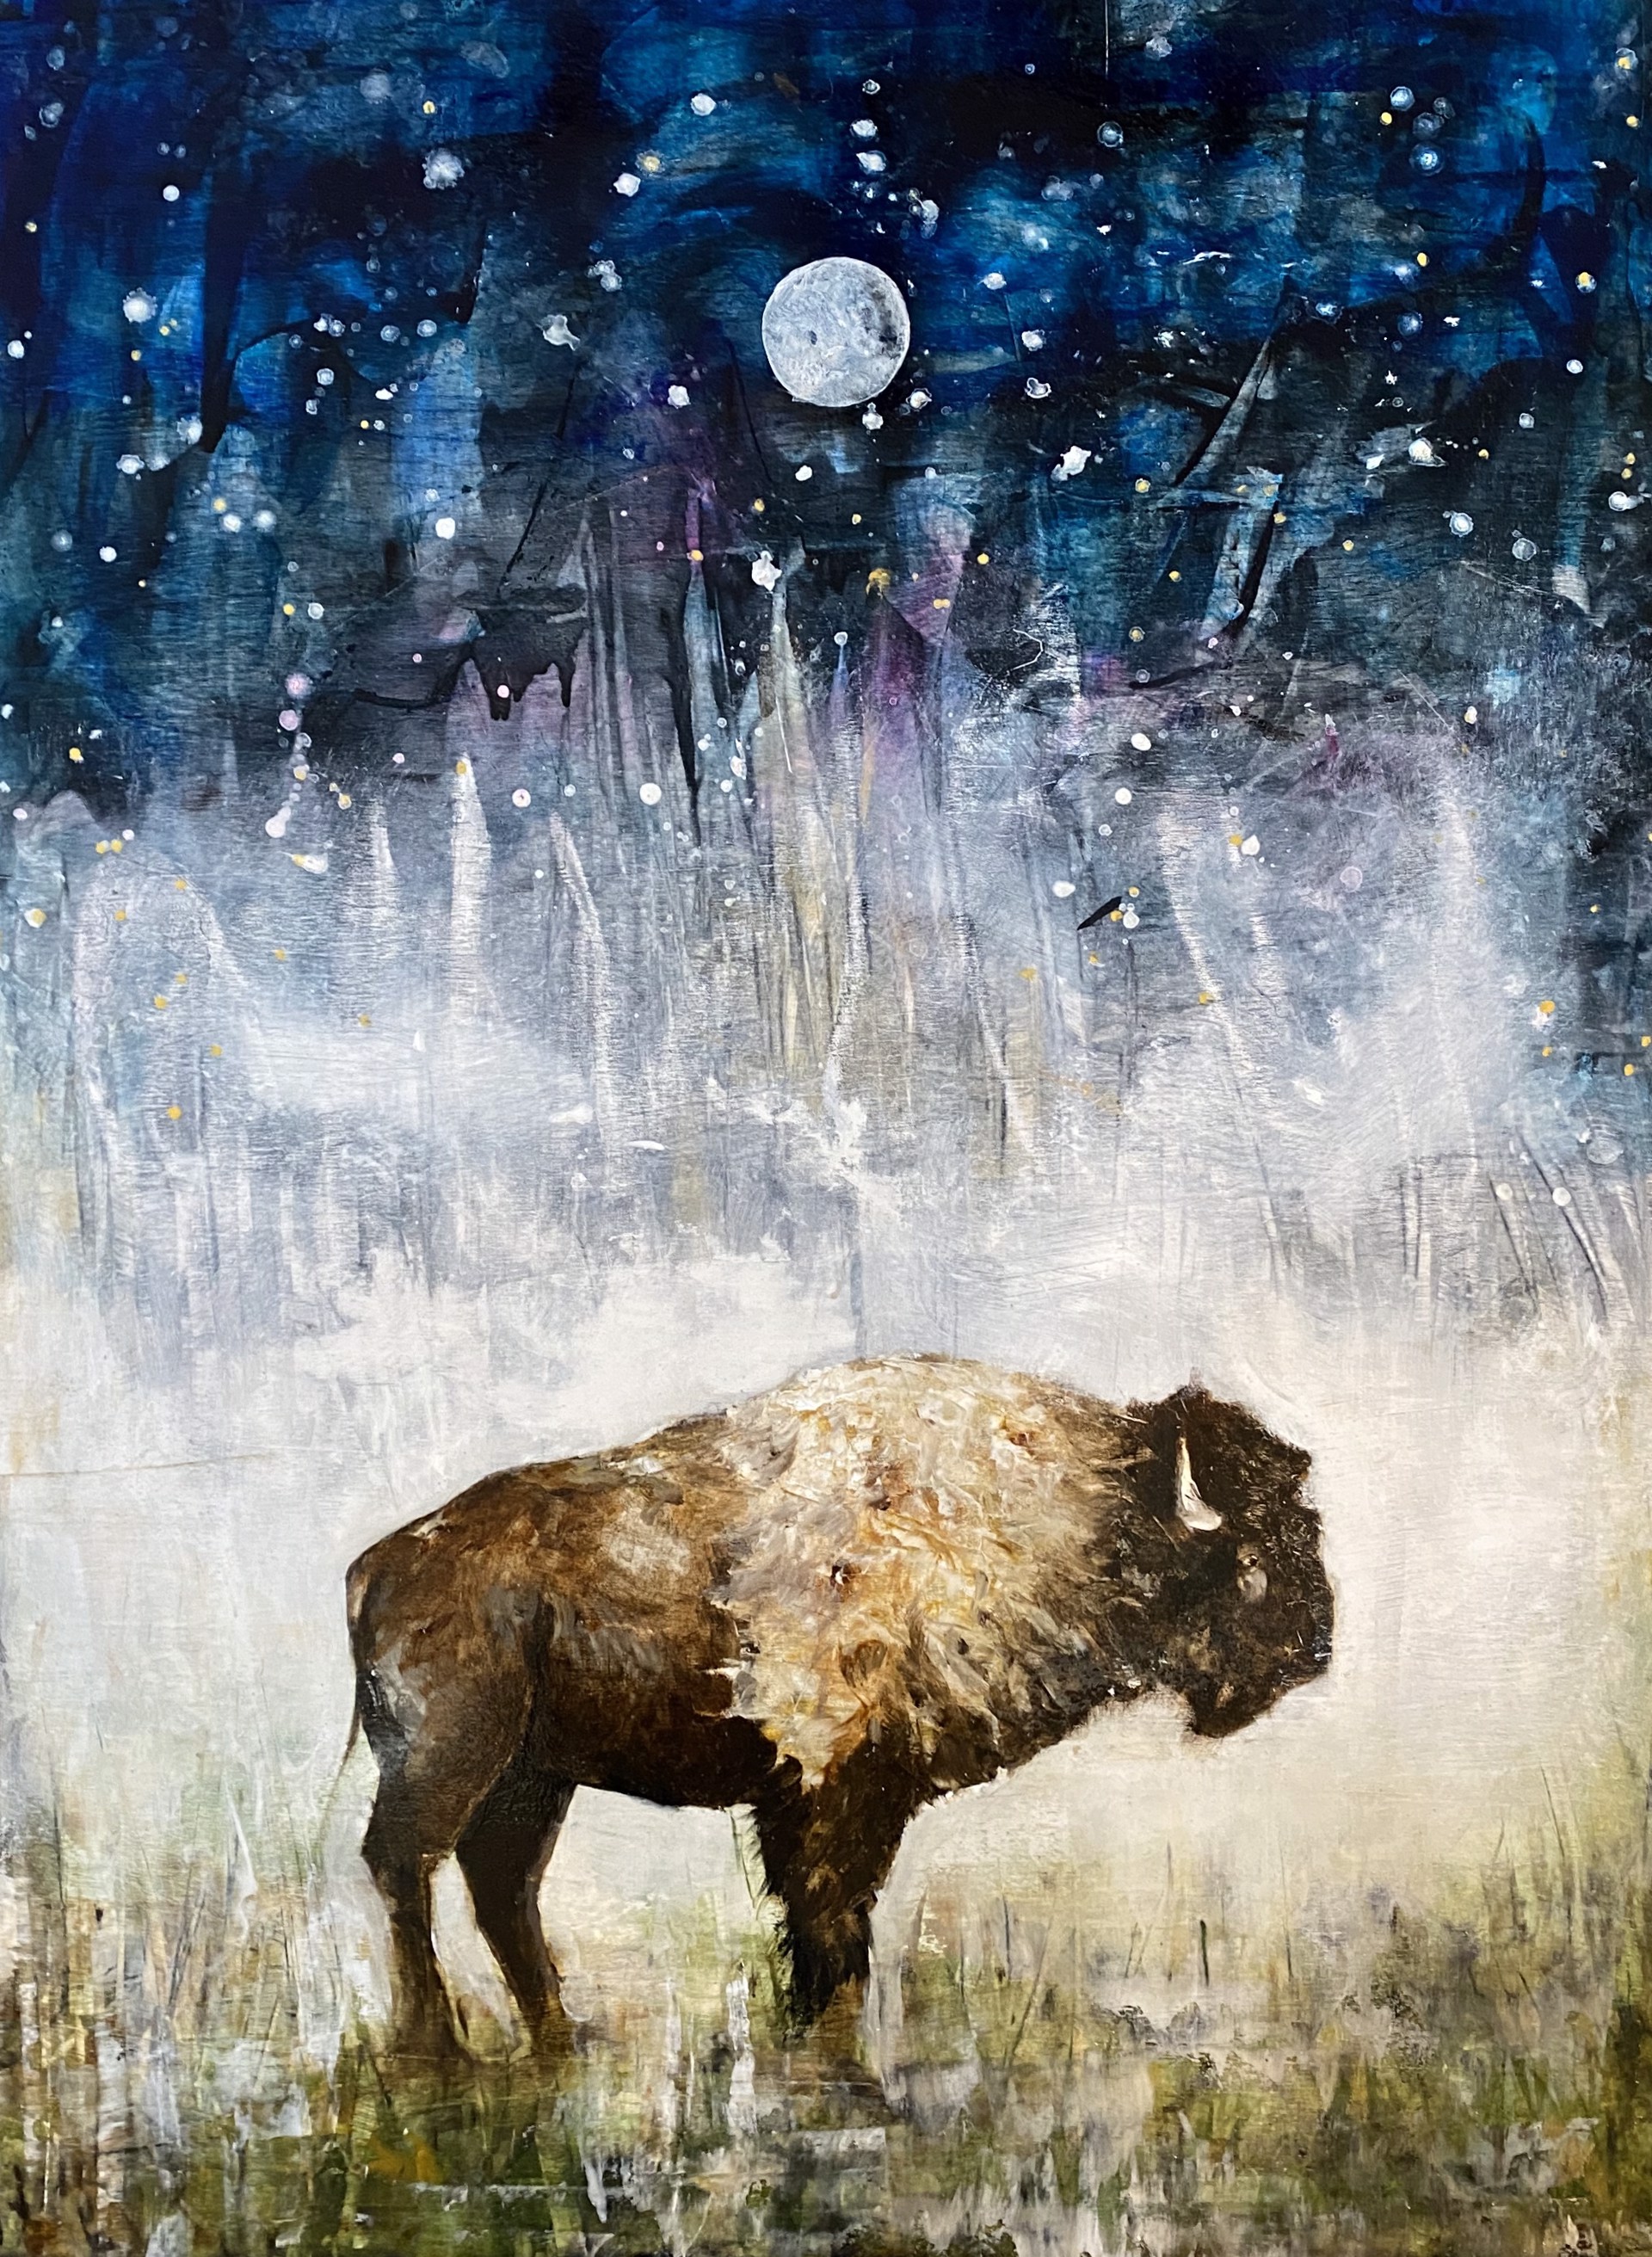 An Original Oil Painting Of A Standing Bison On A Contemporary Style Background With Starry Sky And Moon, By Jenna Von Benedikt